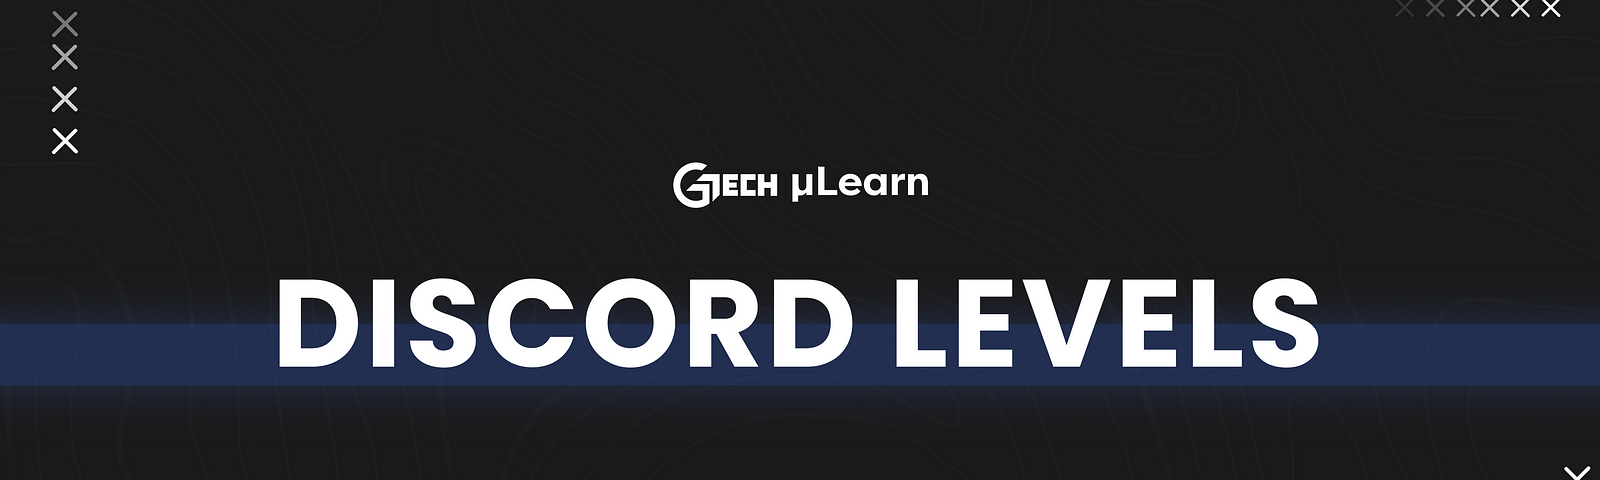 µLearn Discord levels were introduced to make the discord server more user-friendly